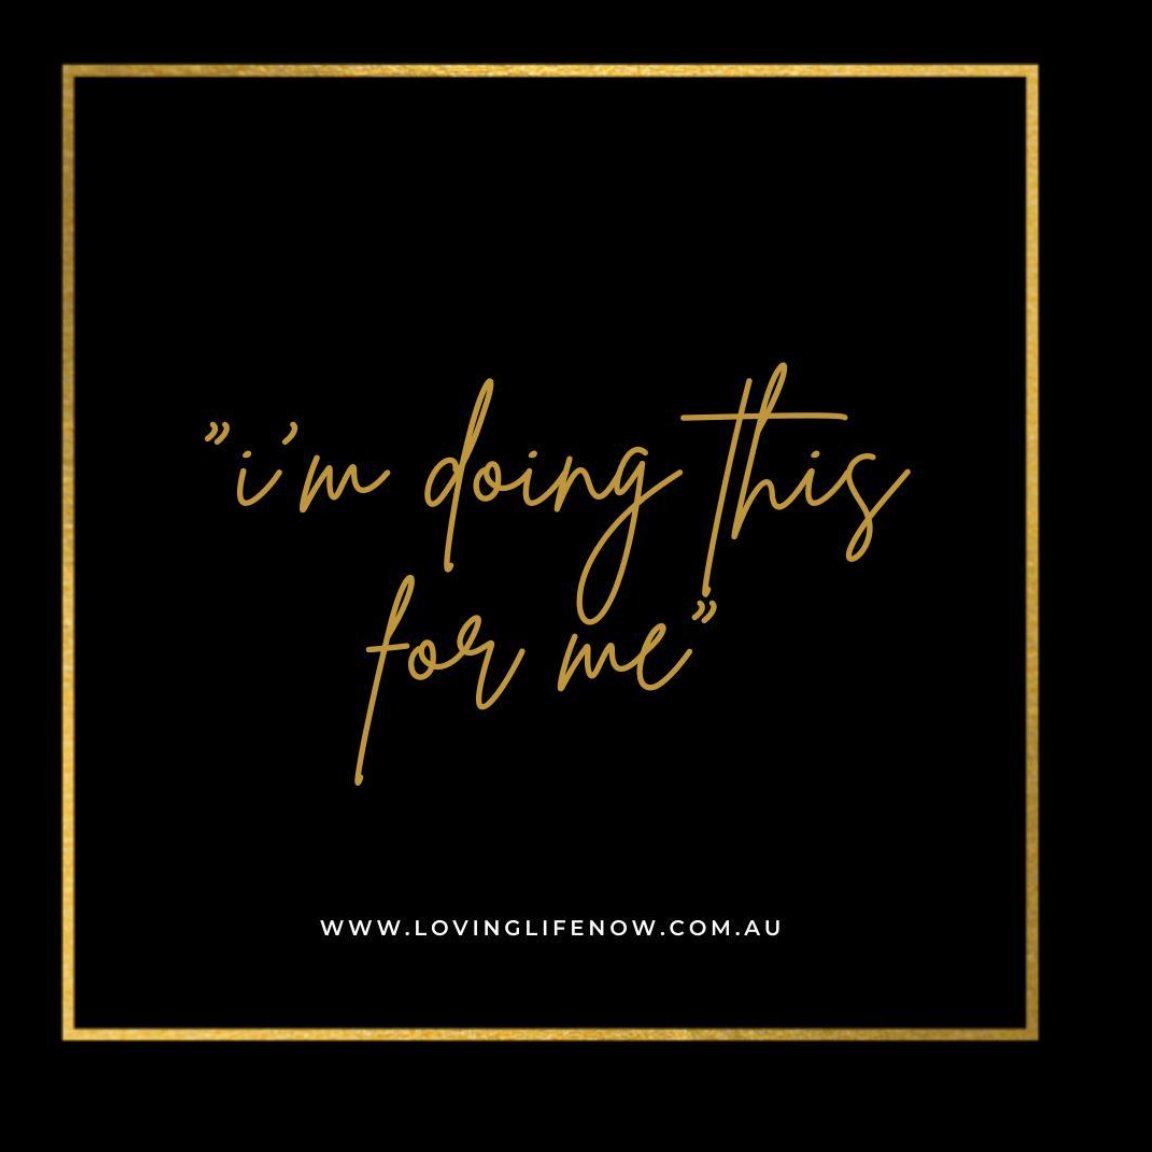 I'm Doing this for ME
-
-
#LivingLovingLife
#OnlineIncomeOpportunity #WorkFromAnywhere #OnlineBusinessSolution
#SimonAndLeeAnne #LifestyleLoveAndBeyond
#LaptopLifestyle #PortableOnlineBusiness
#SimonHaggard #LeeAnneHaggard #LovingLifeNow